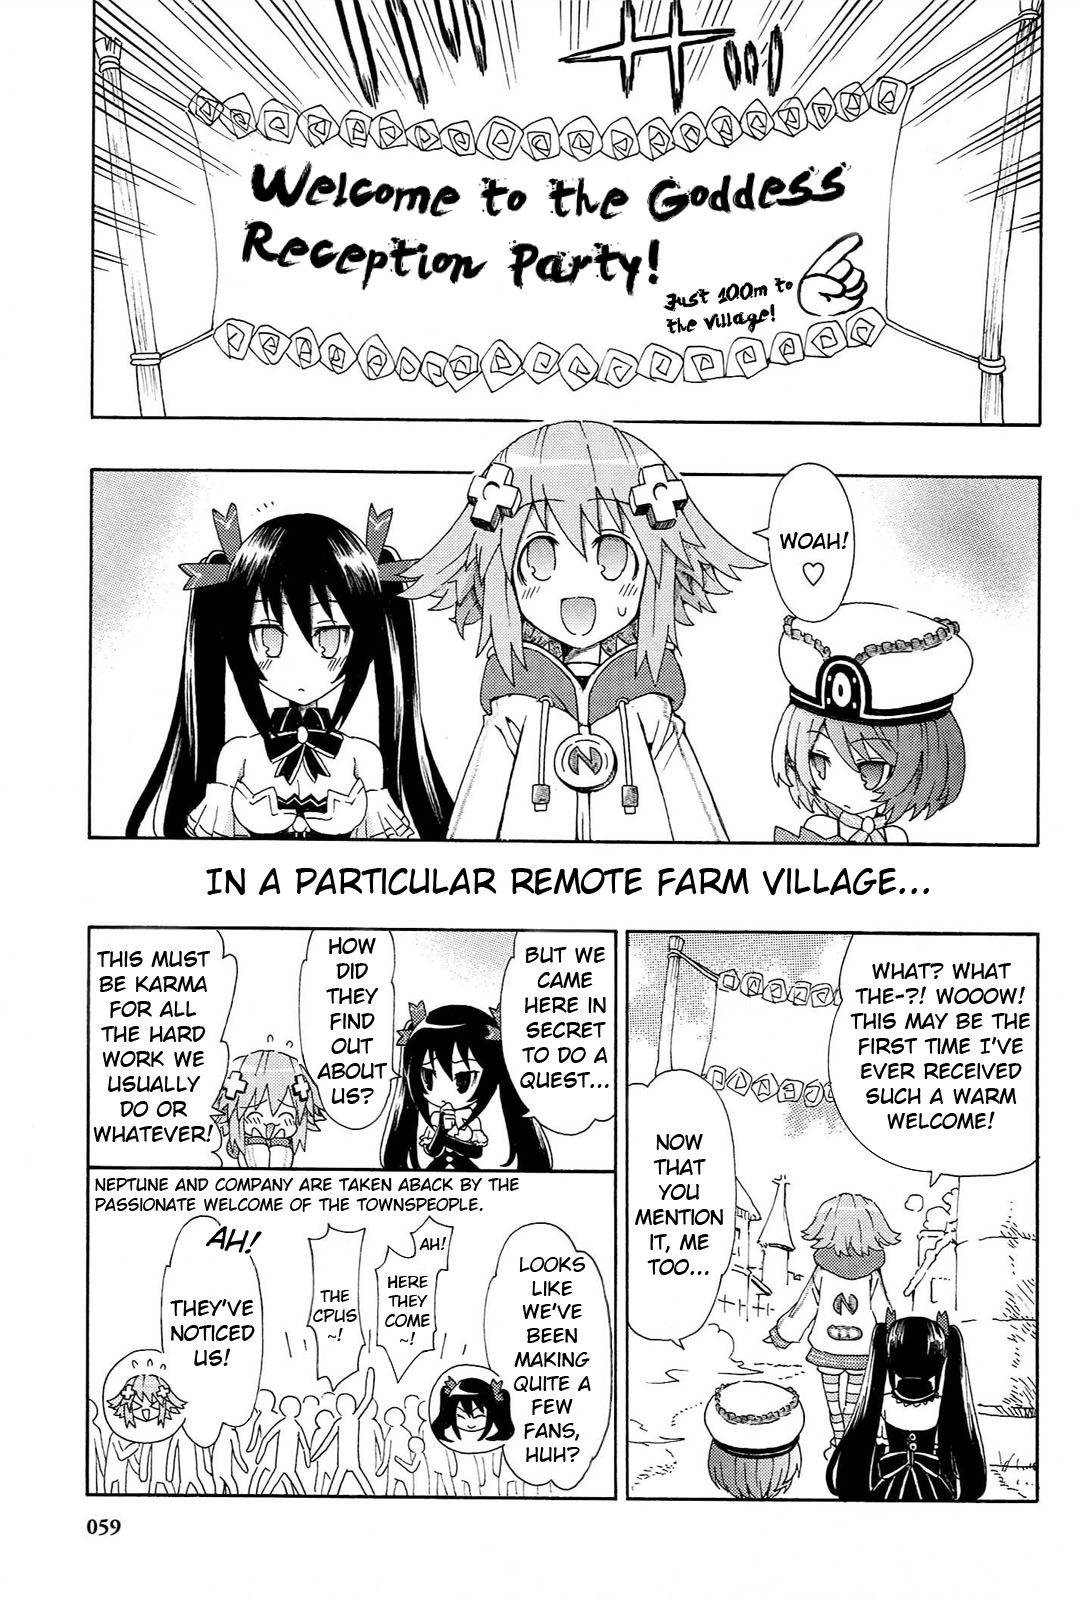 Hyperdimension Game Neptune ~Megami Tsuushin~ Vol. 2 Ch. 13 Watch Out for Counterfeit Goods!